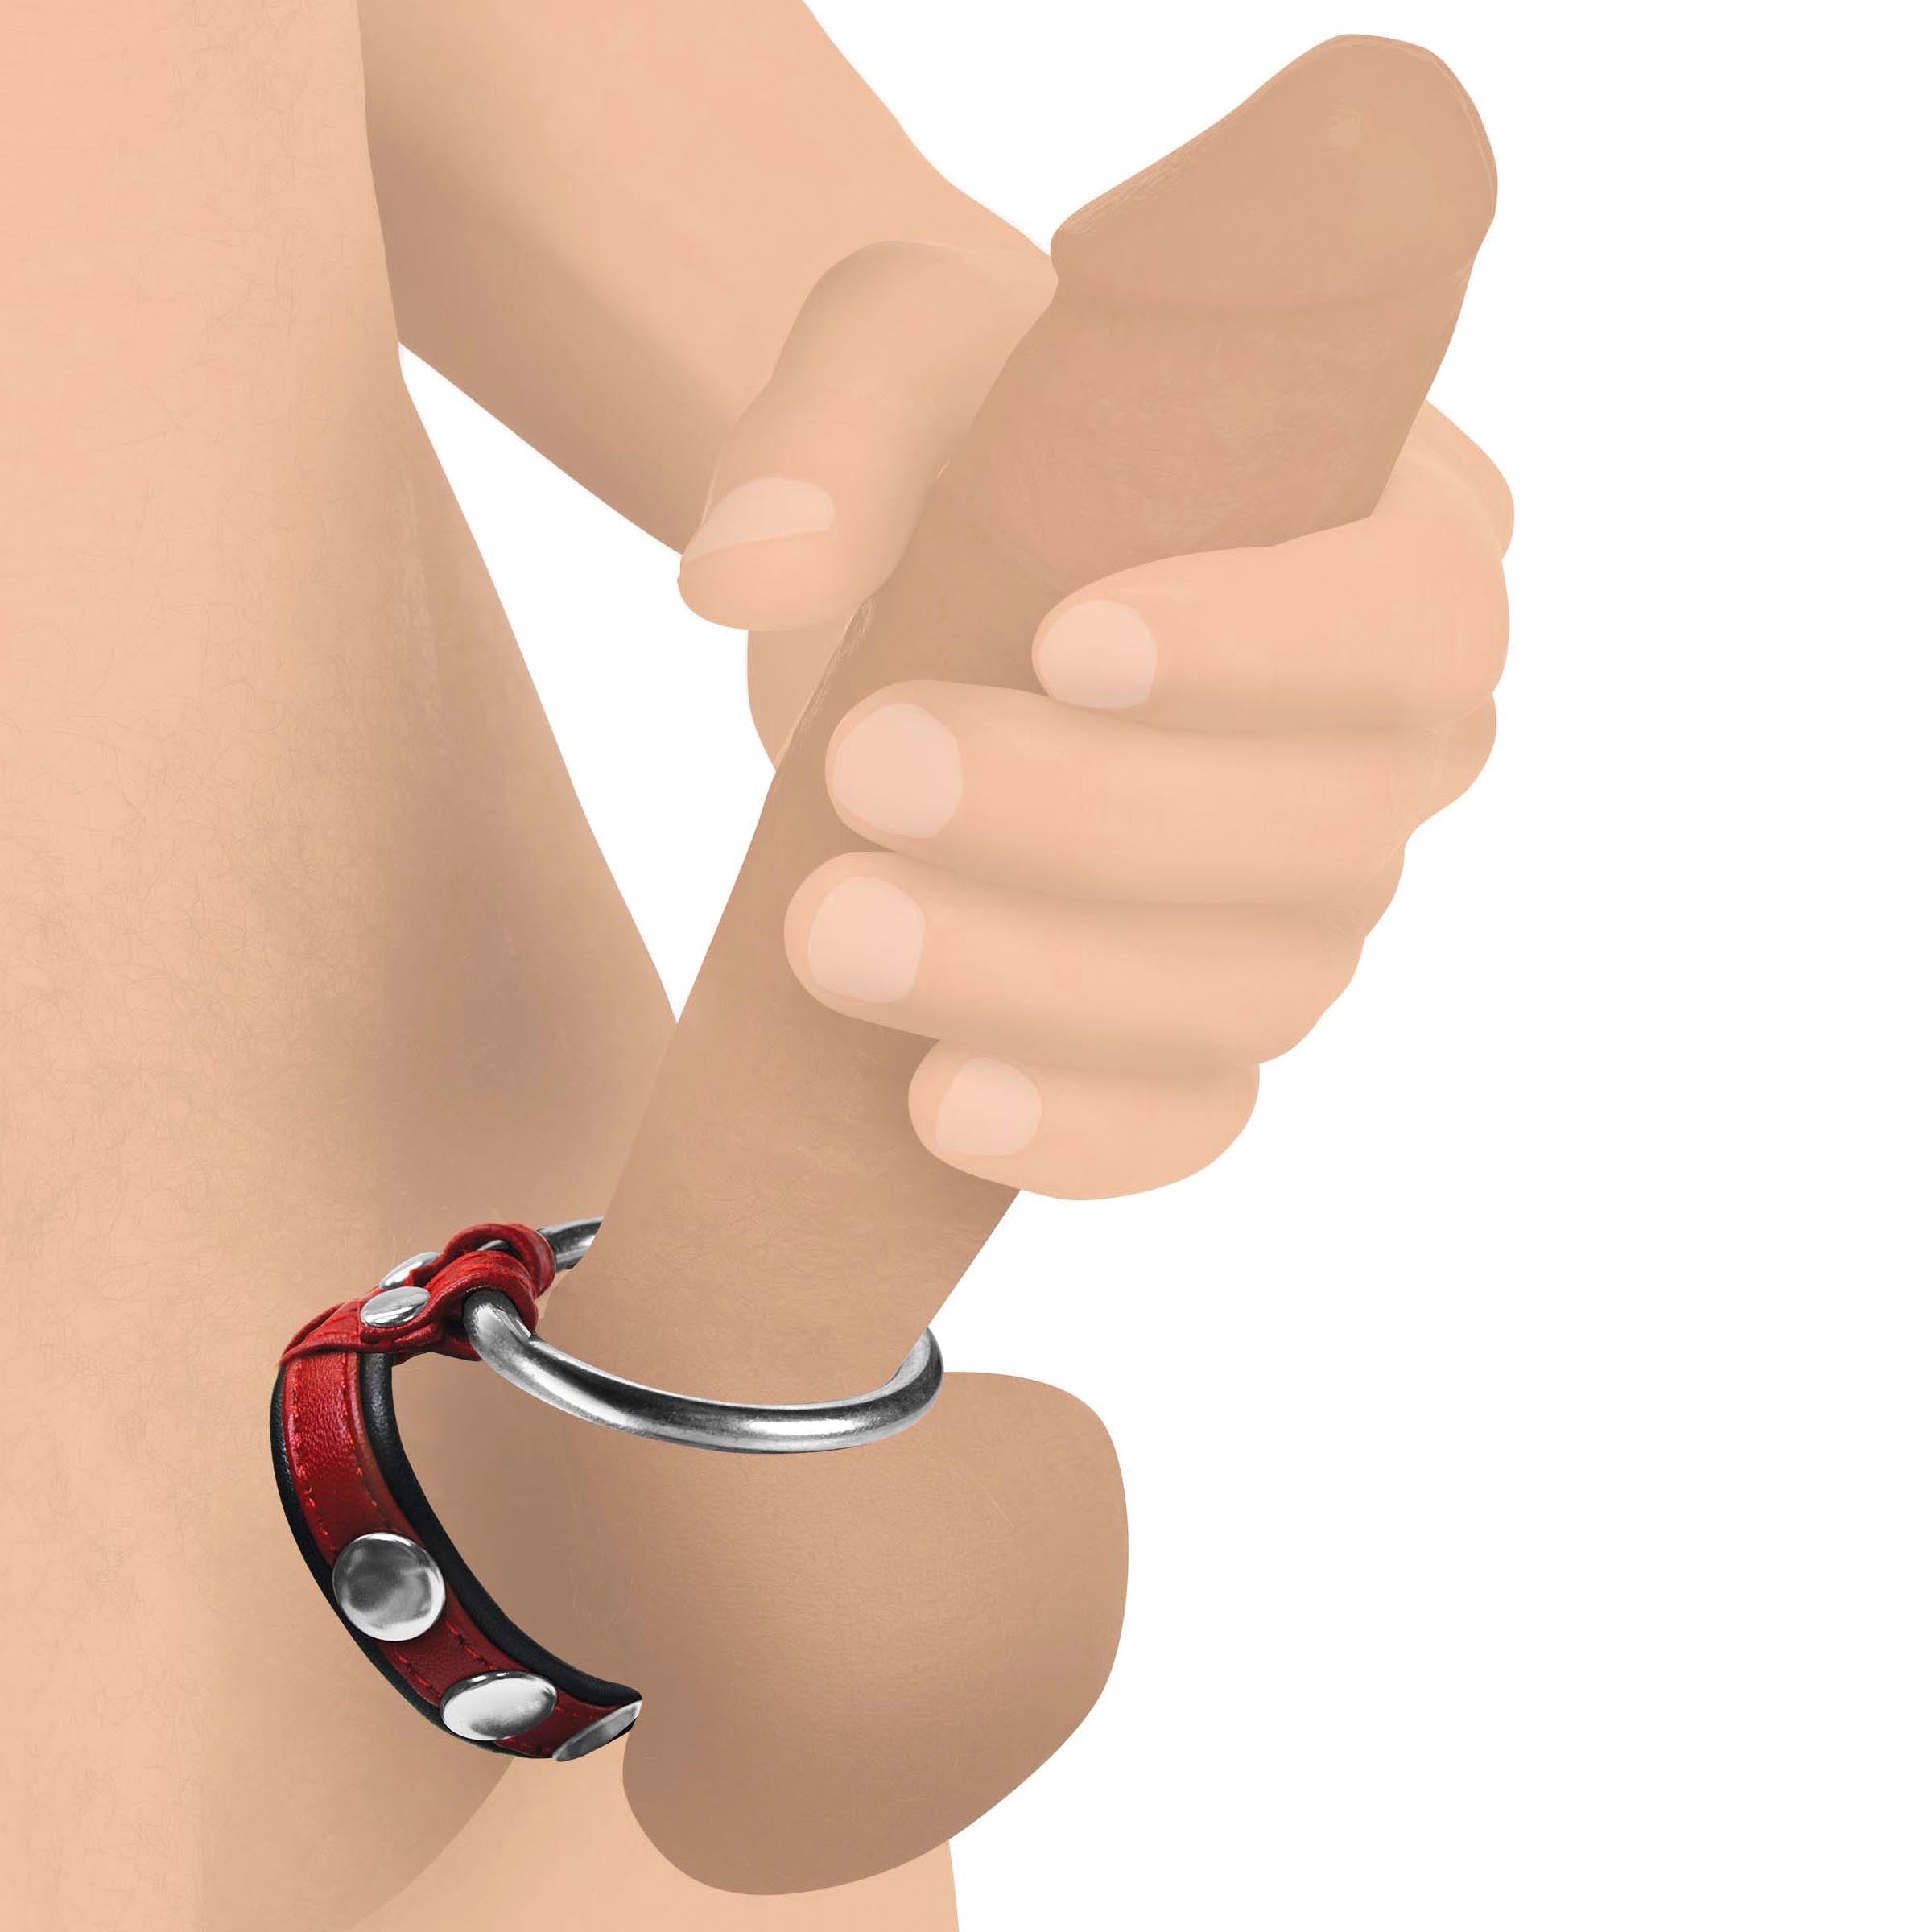 Leather and Steel Cock and Ball Ring - Red - DealByEthan.gay